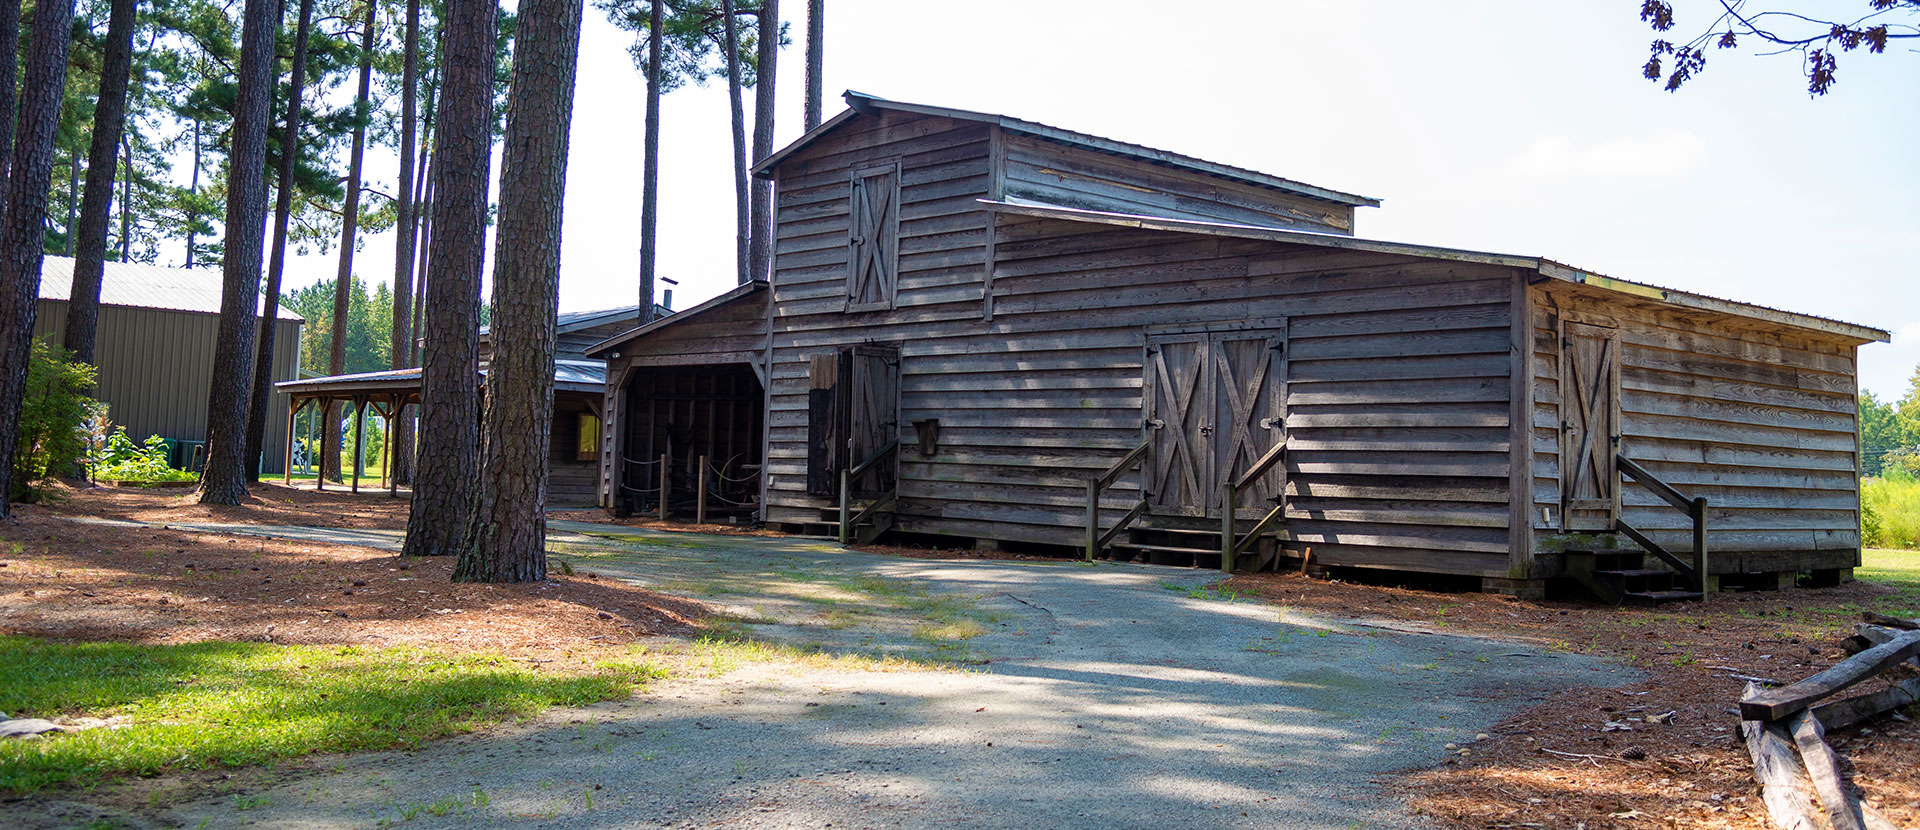 Tobacco Farm Life Museum pack house building, Kenly NC.